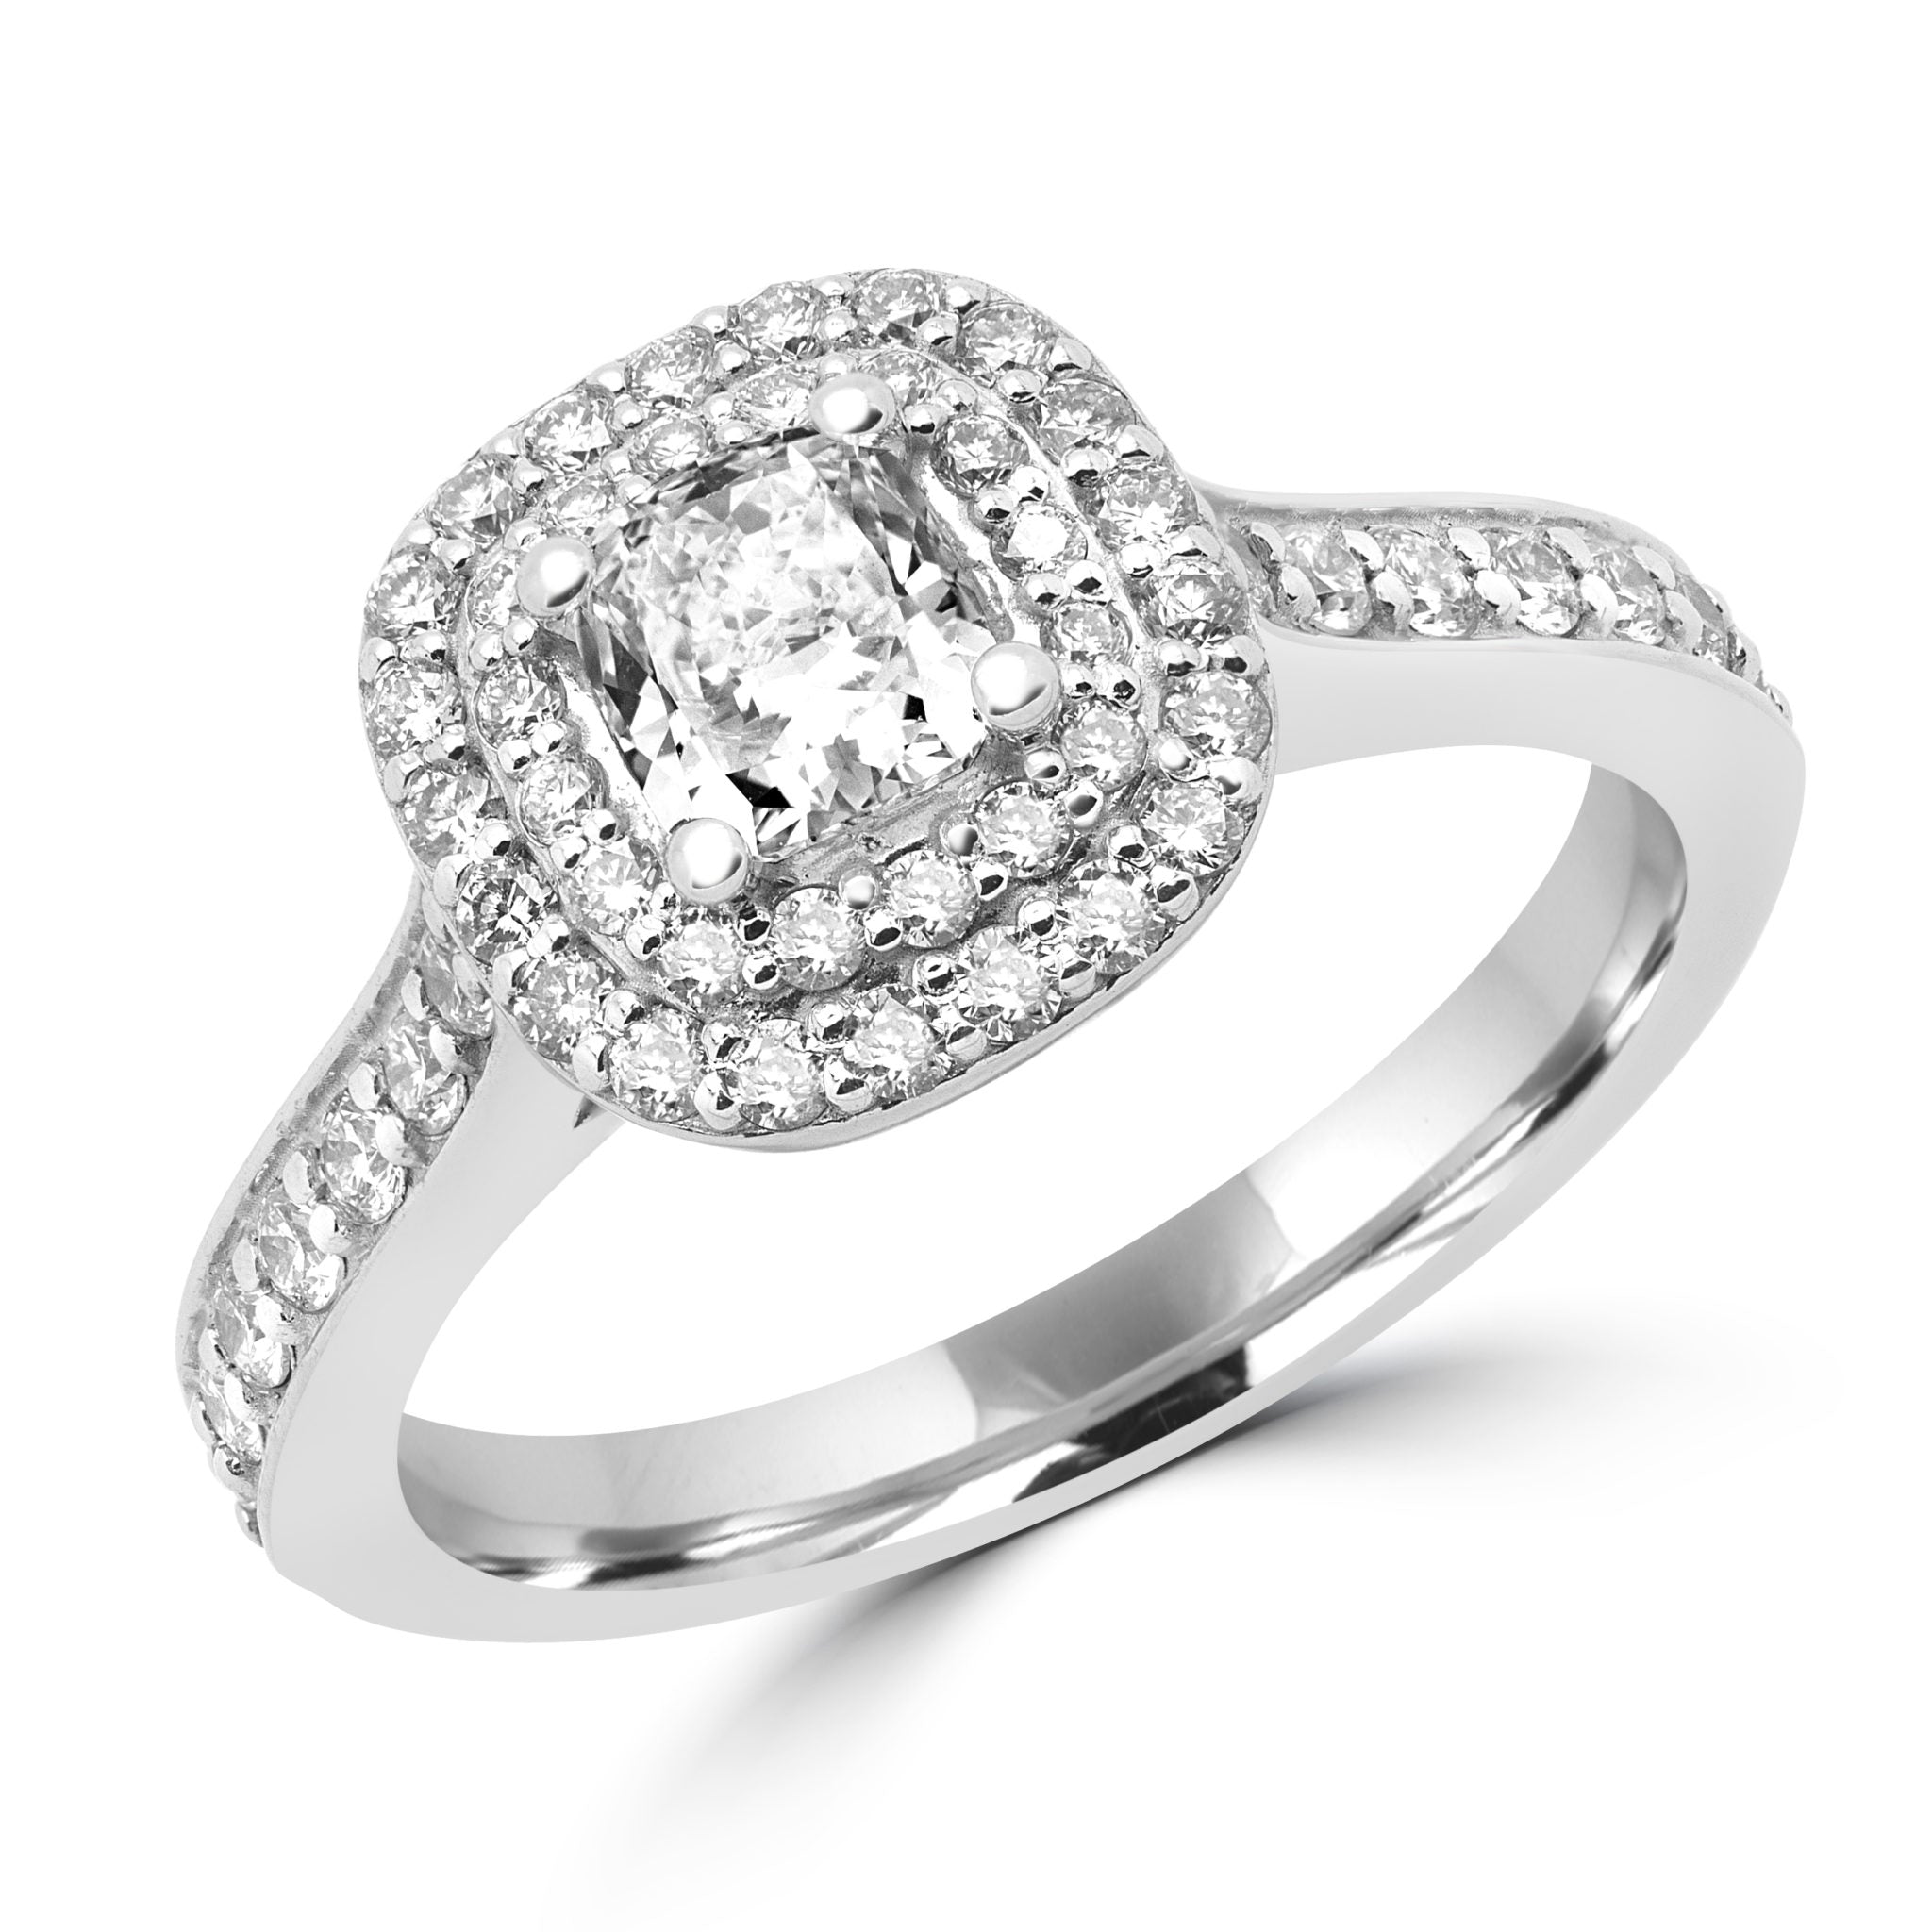 Halo sparkling engagement ring 0.58 (ctw) +CZ center in 14k white gold